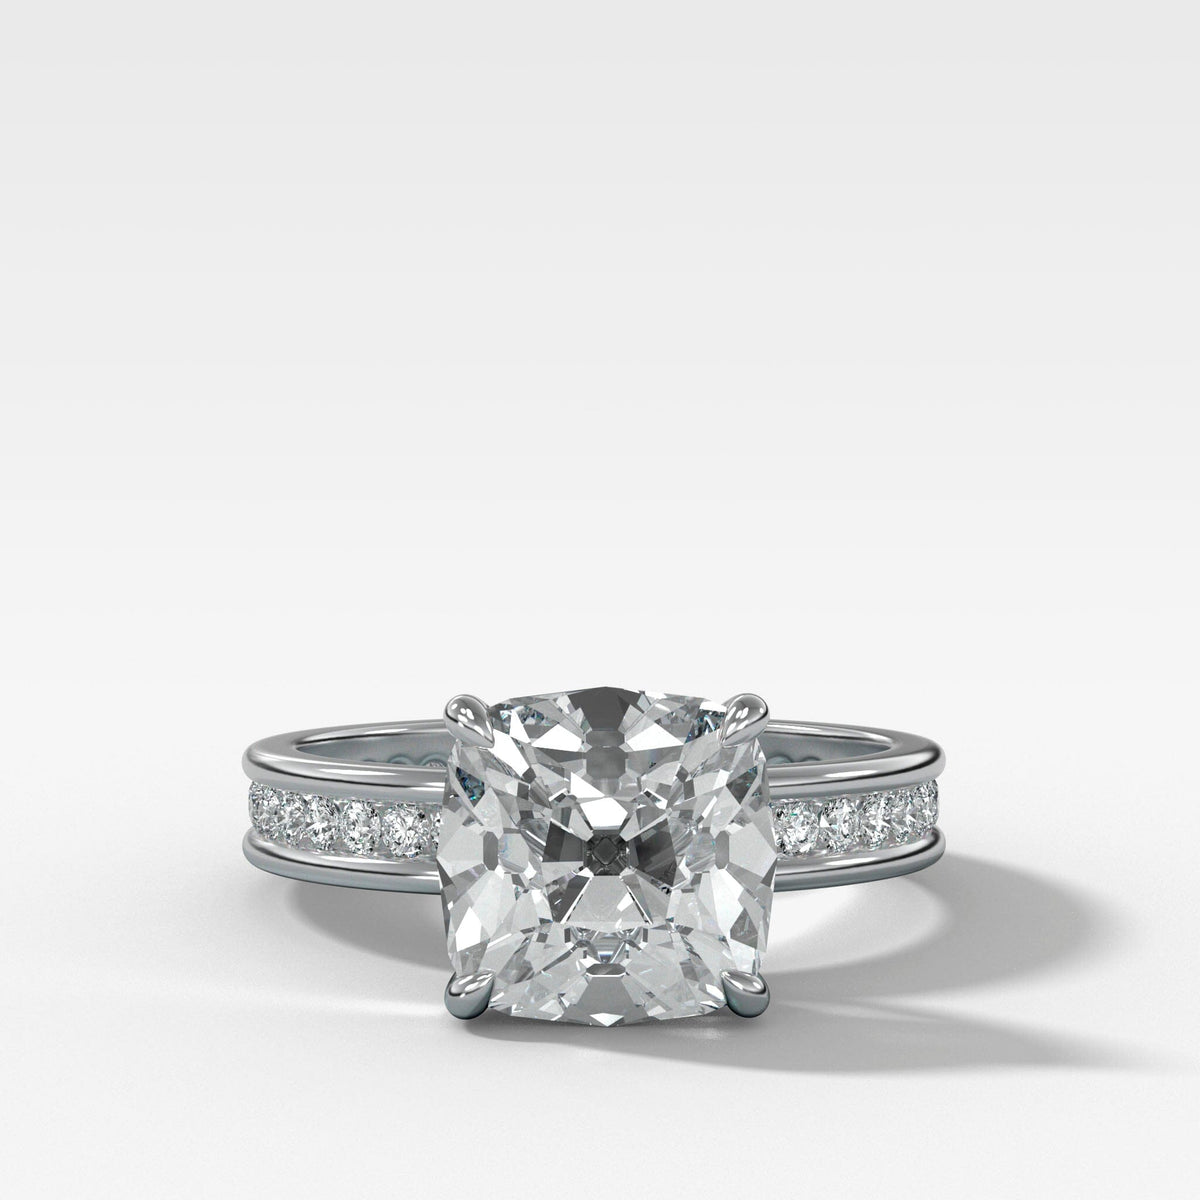 Petite Channel Set Solitaire Engagement Ring with Old Mine Cut Diamond Engagement Good Stone Inc White Gold 14k Natural